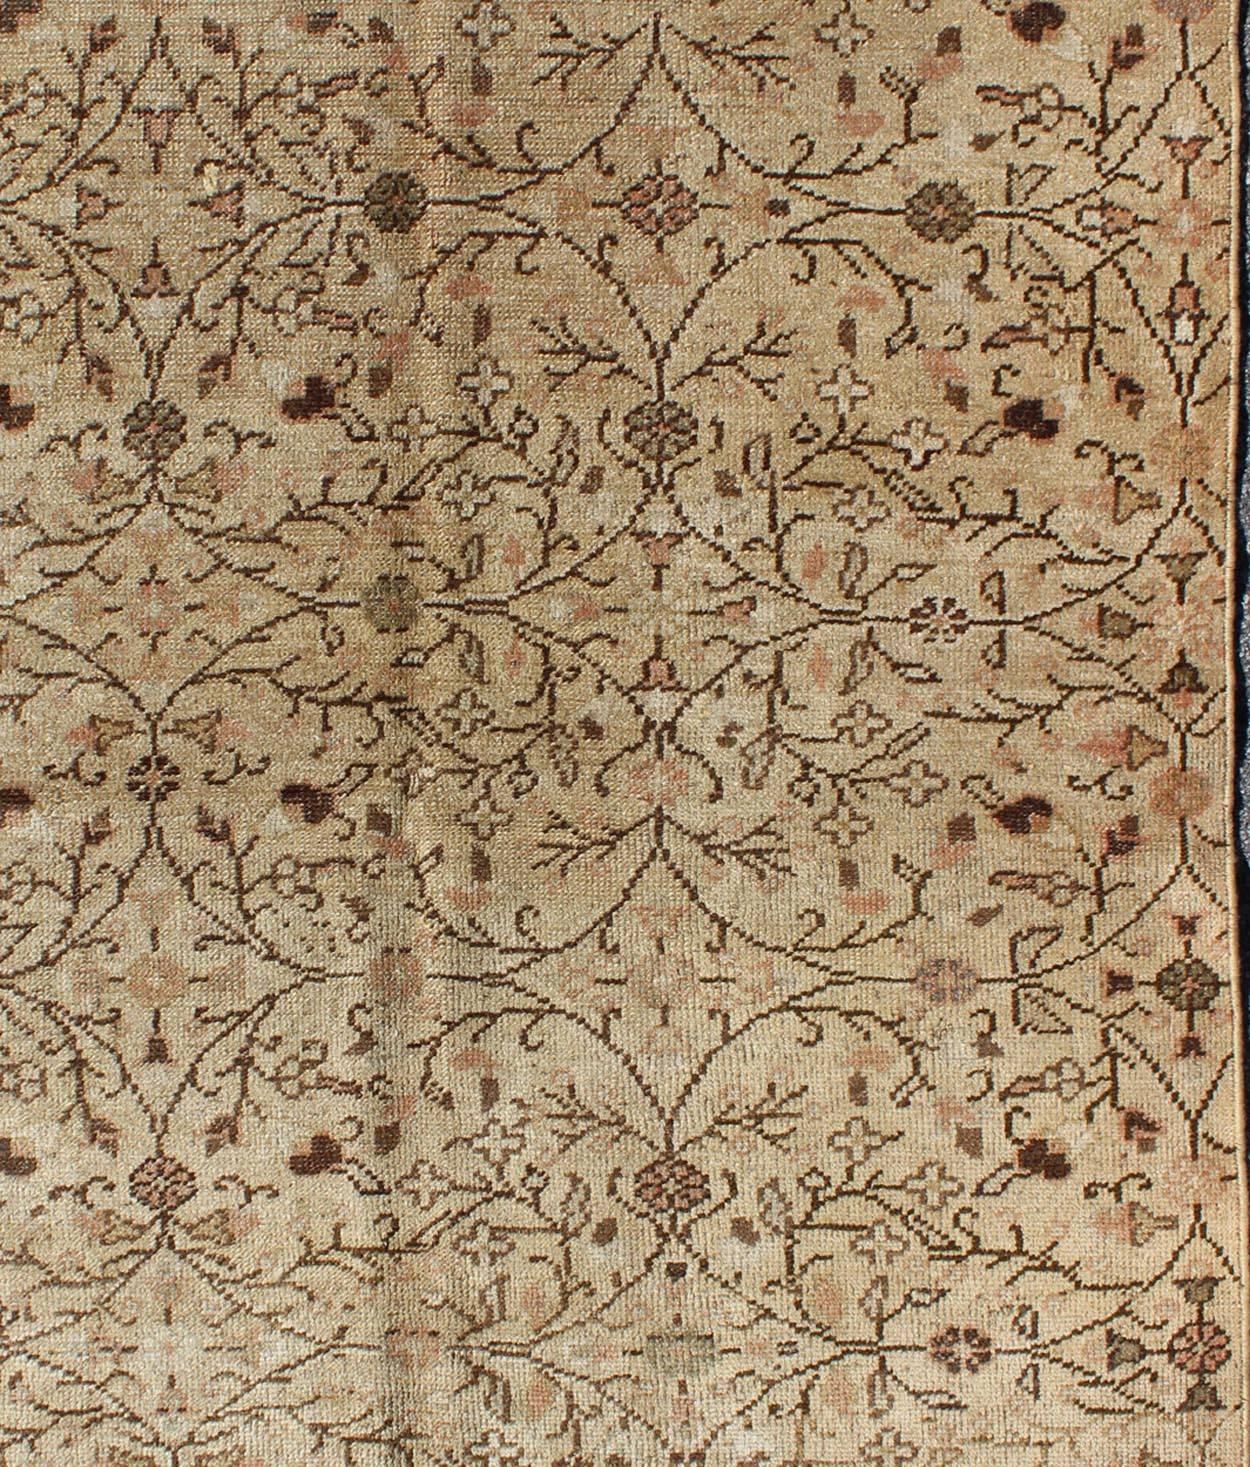 Vintage All-Over Floral Design Turkish Oushak Rug with Free-Flowing Pattern In Excellent Condition For Sale In Atlanta, GA